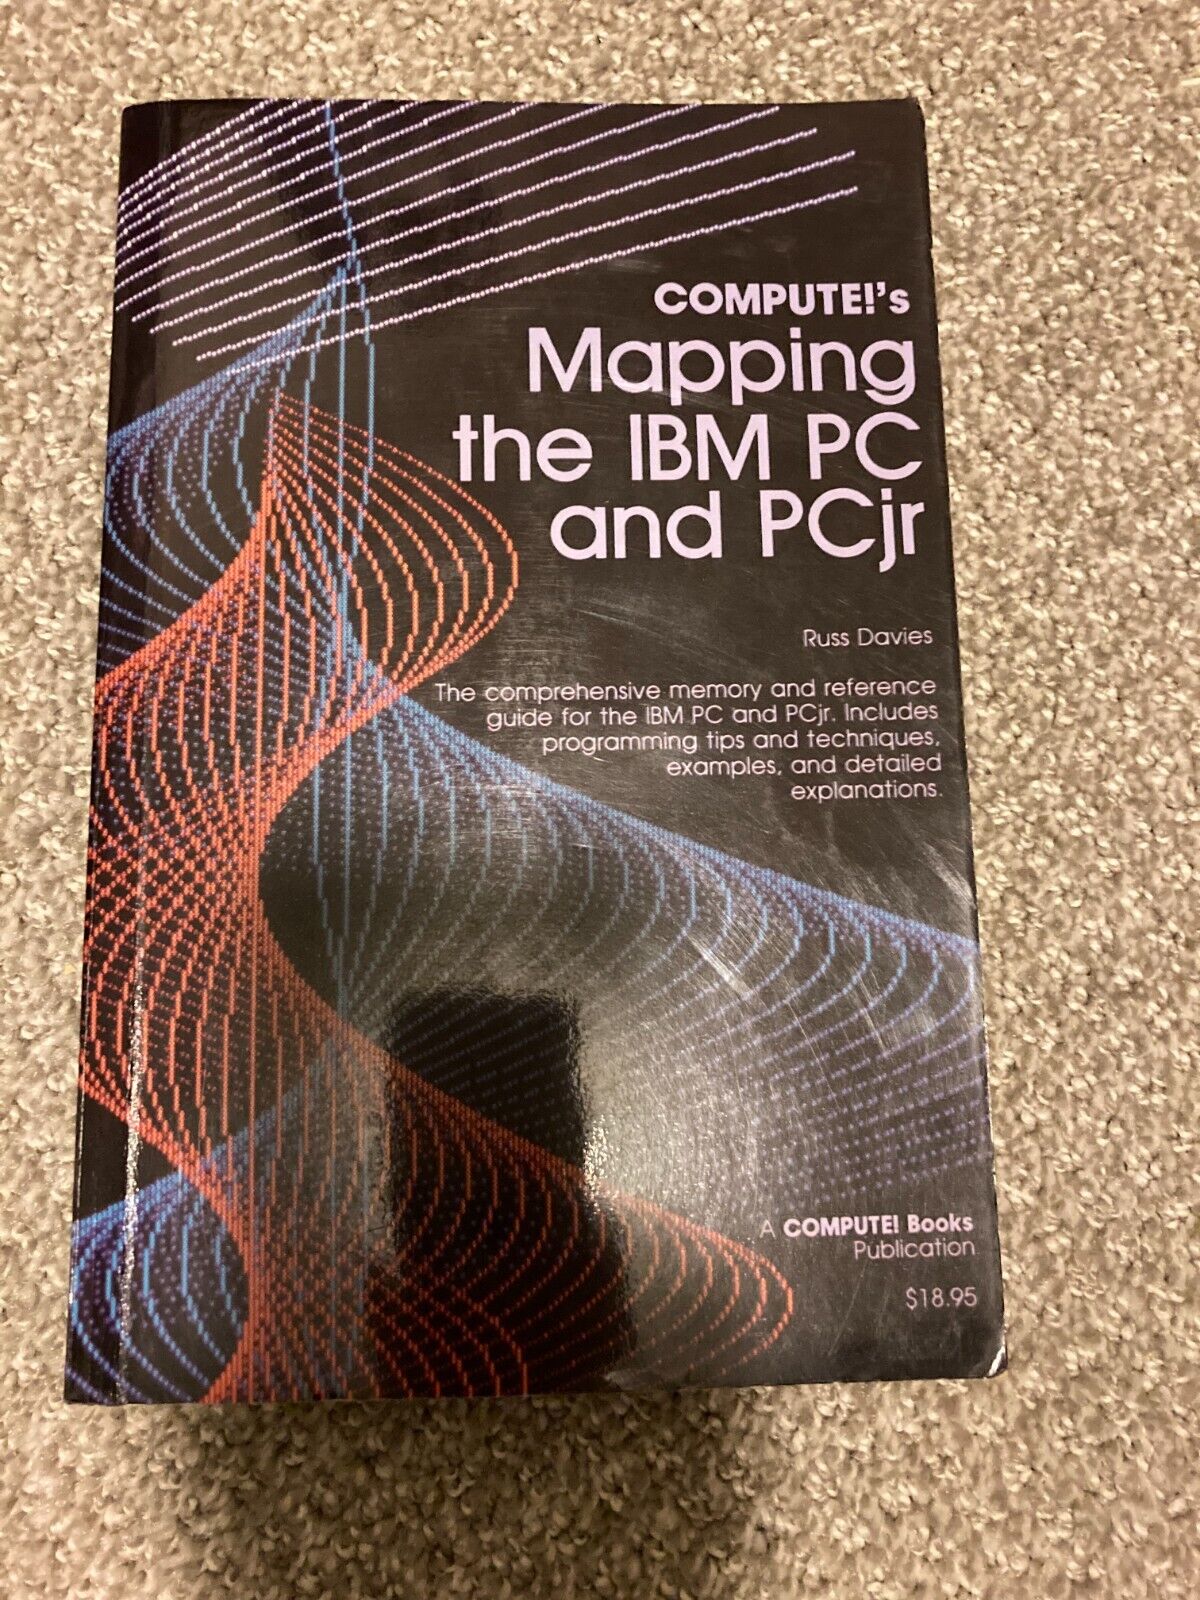 Compute's Mapping the IBM PC and PCjr Russ Davies Programming Reference Guide